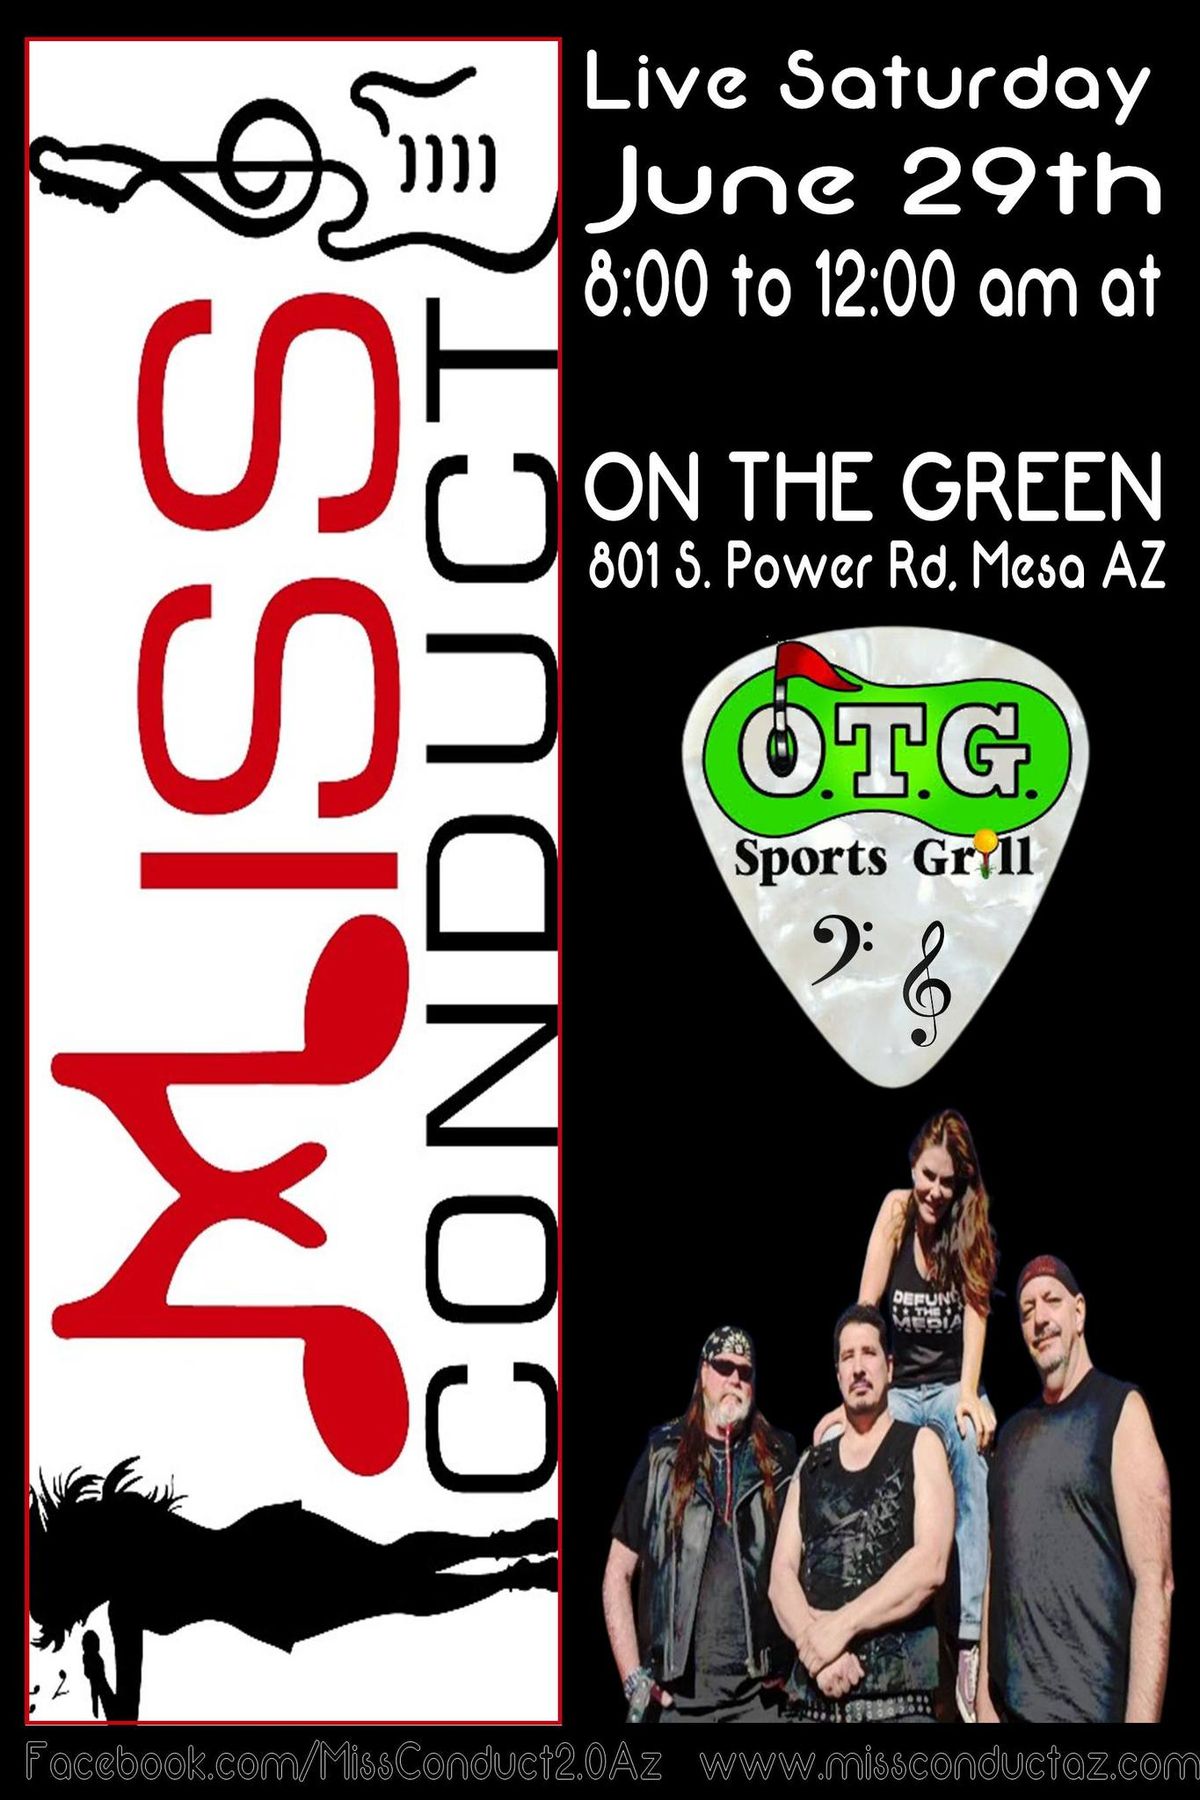 "Miss Conduct at "On the Green" Sat June 29th   LIVE ROCK&ROLL!